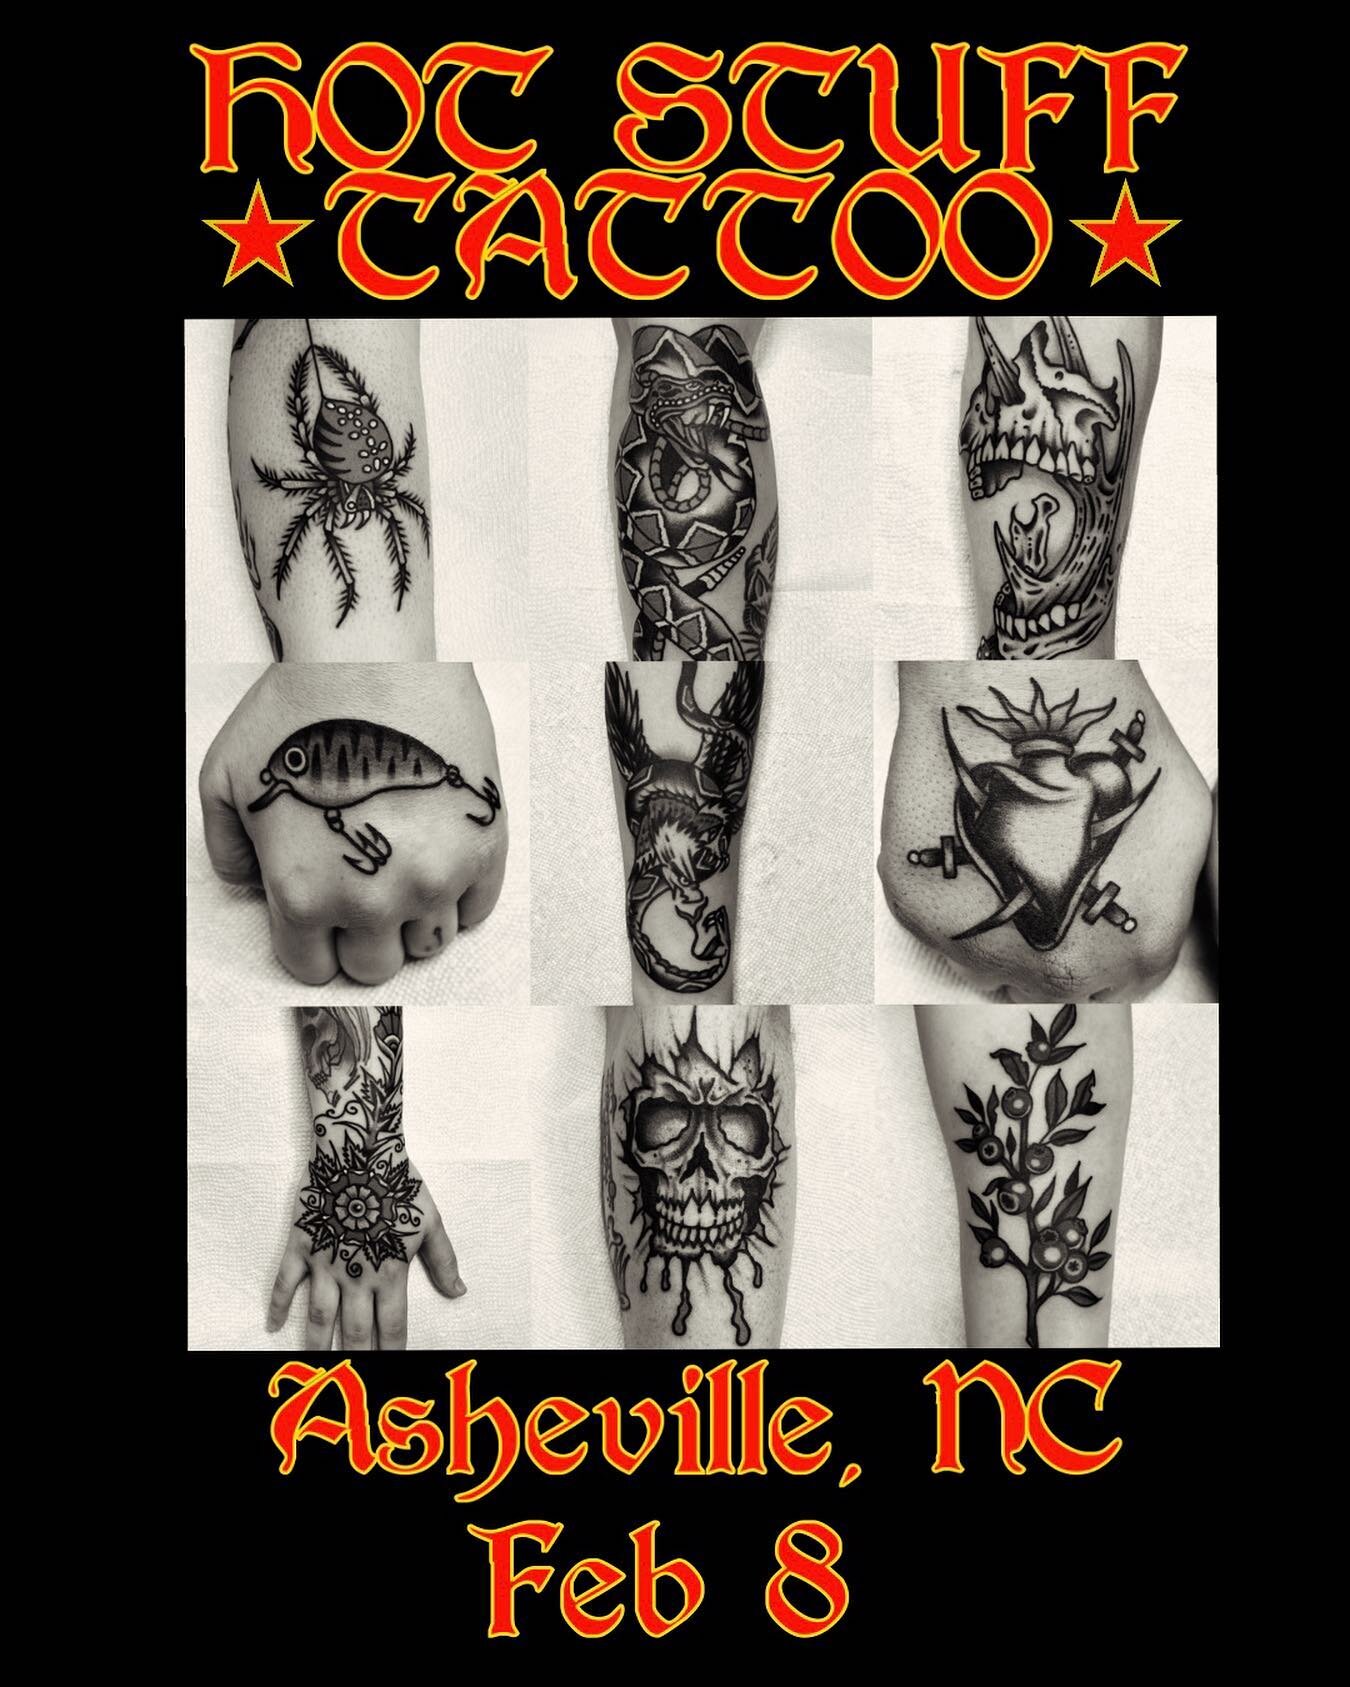 I will be with the amazing crew at @hotstufftattoo February 8th in Asheville, NC. DM me to set something up.